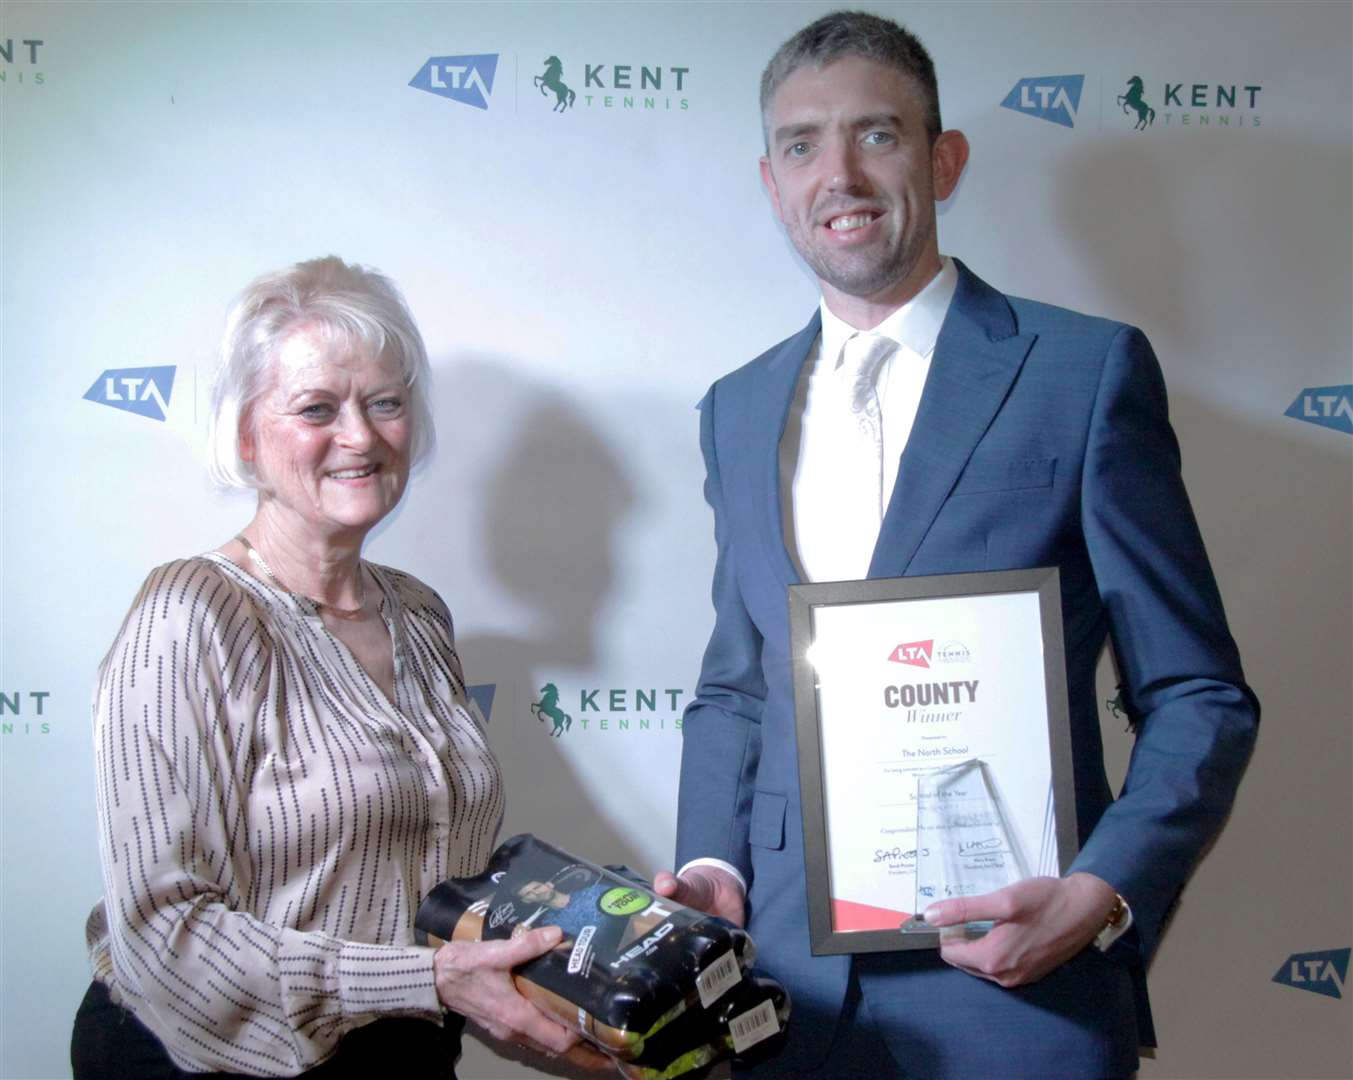 Head tennis coach Andrew Sunderland picks up the award for School of the Year from Kent LTA president Mary Evans